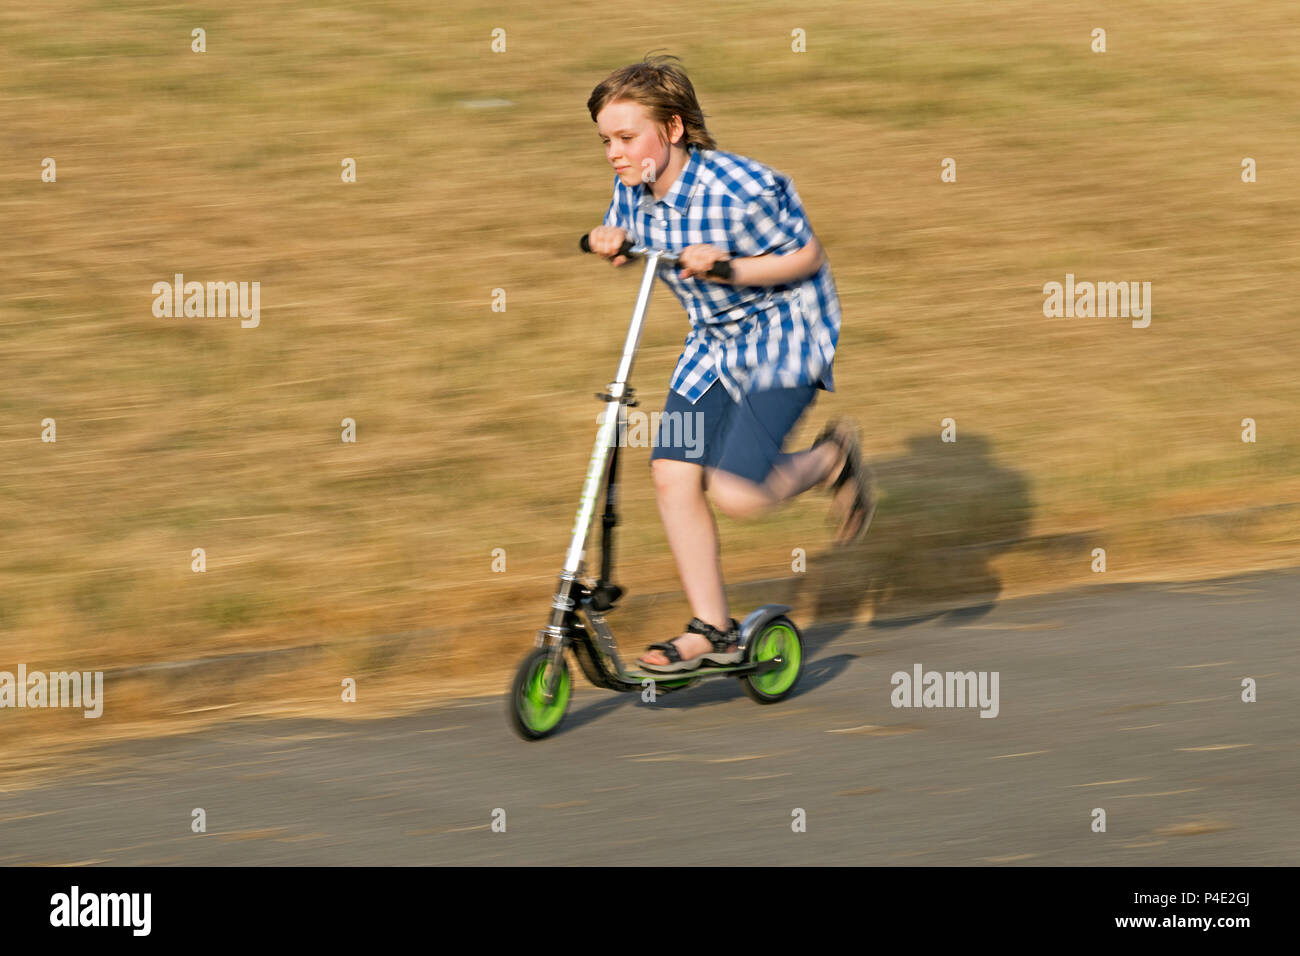 young boy riding his scooter Stock Photo